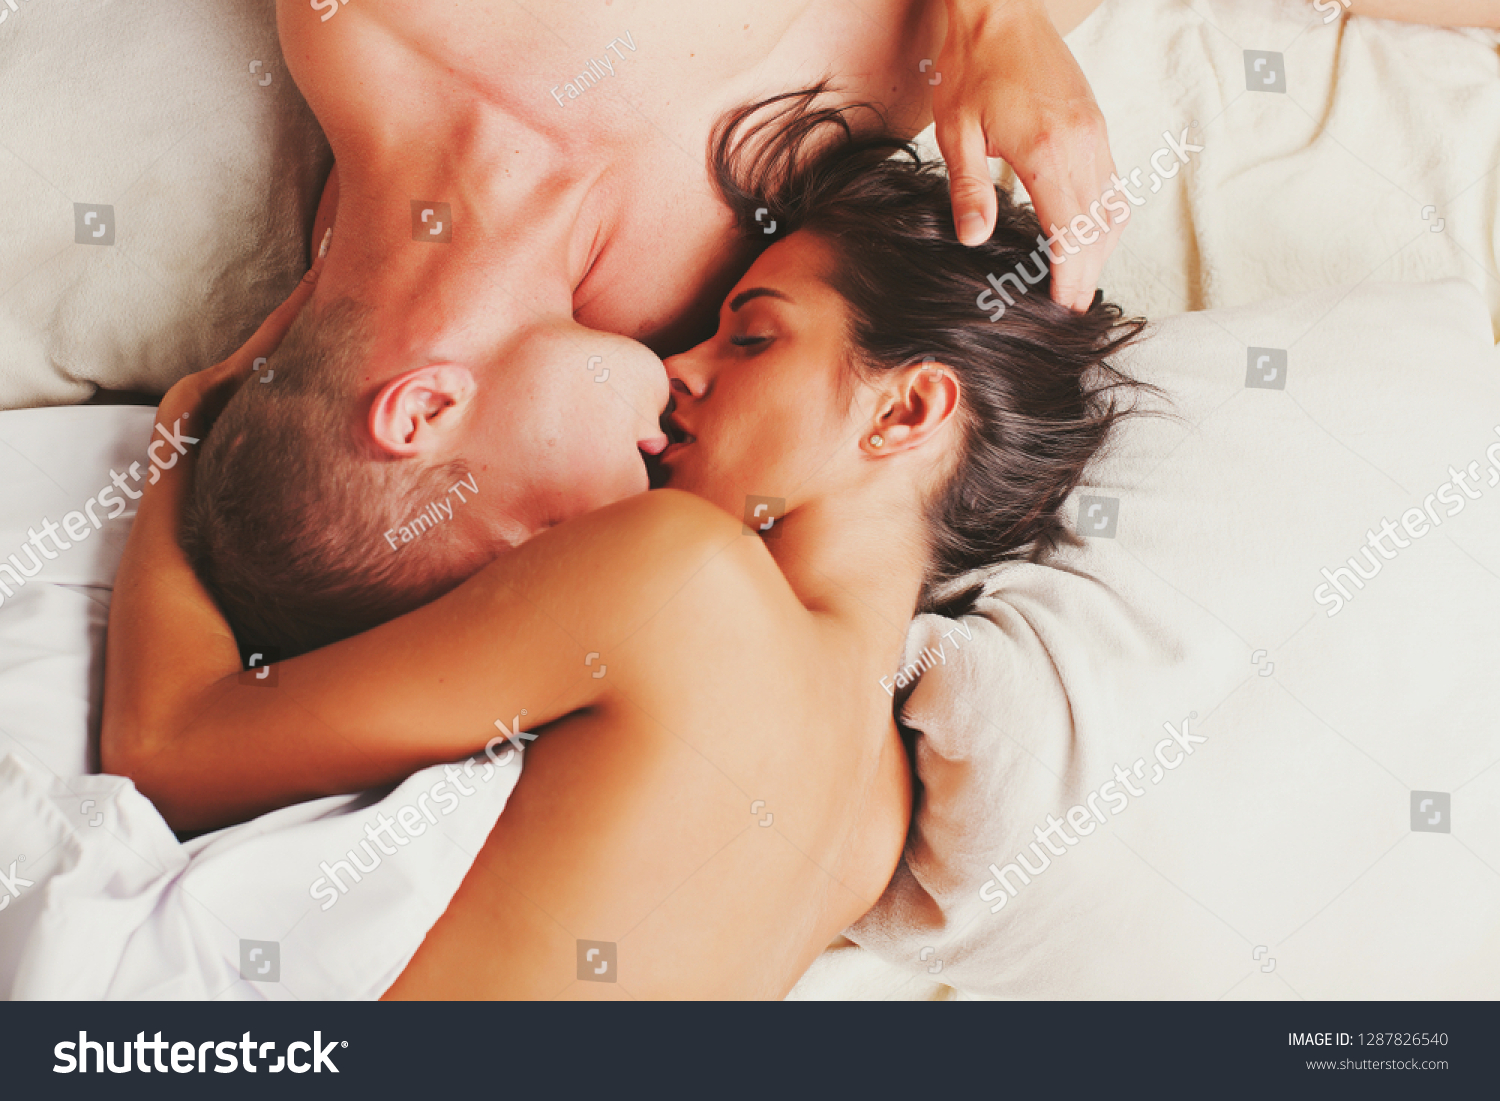 Young Couple Nudity In Fucking Posotion